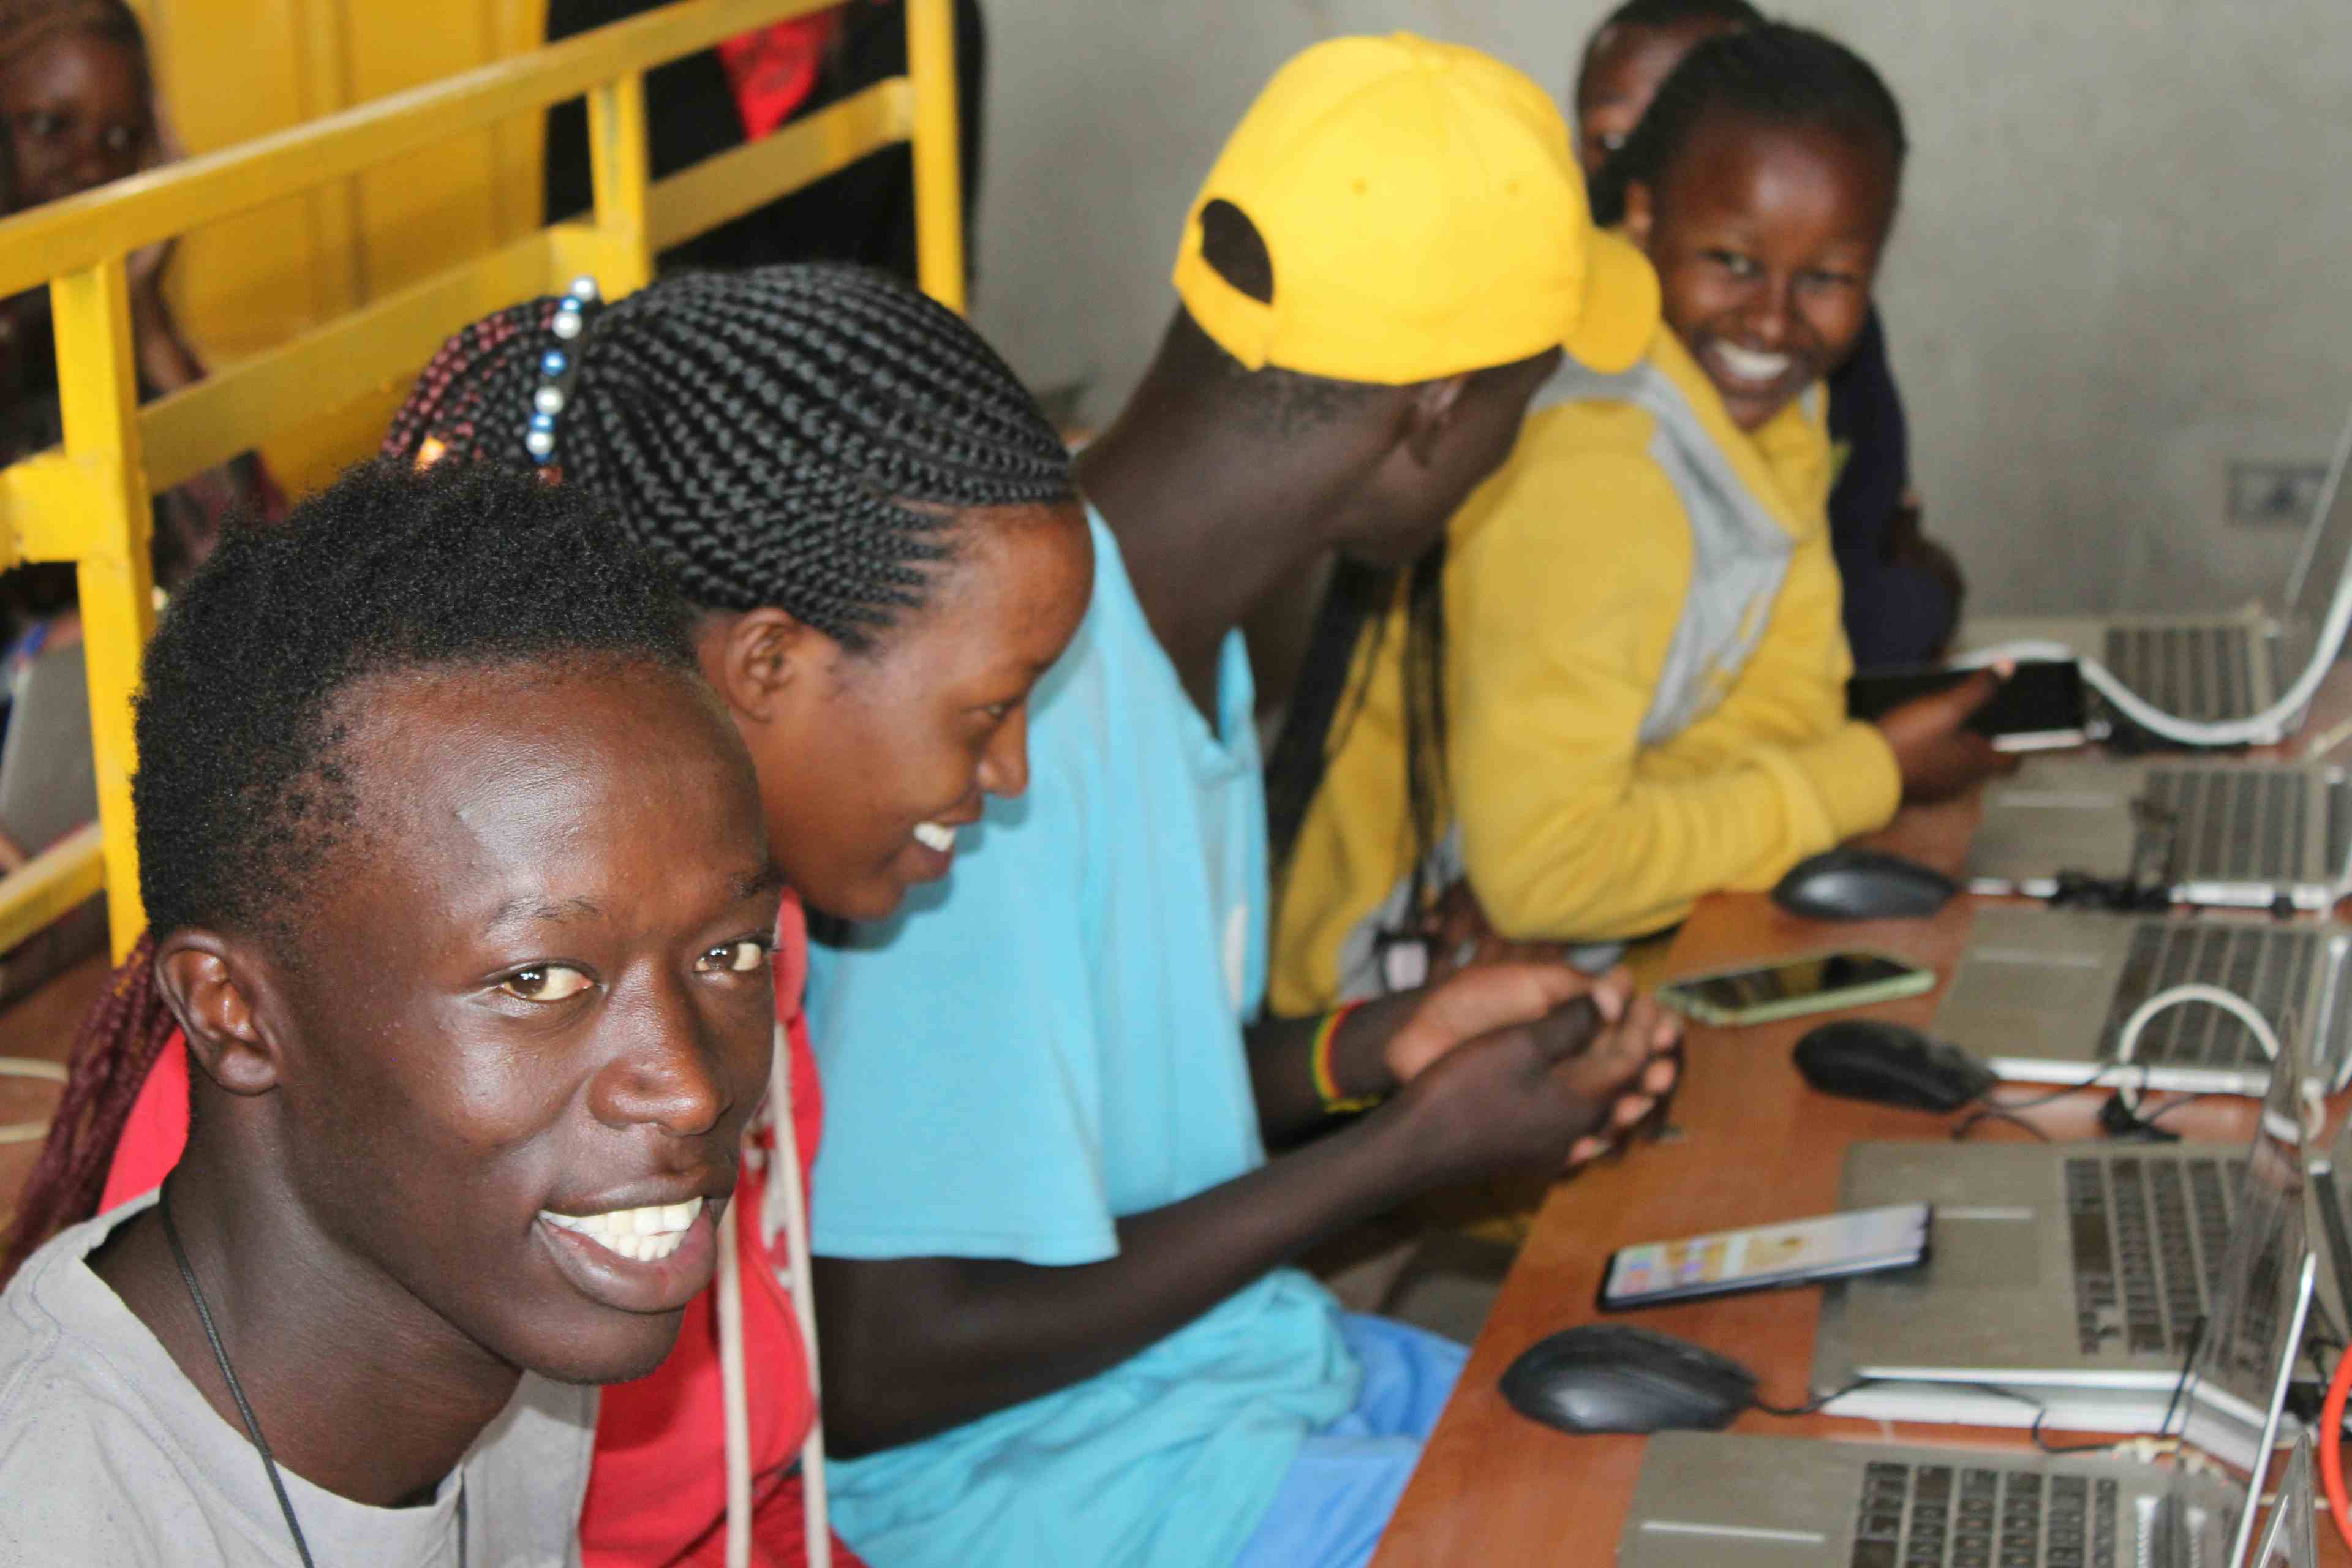 Kenya youth smiling with phones, laptops and mice